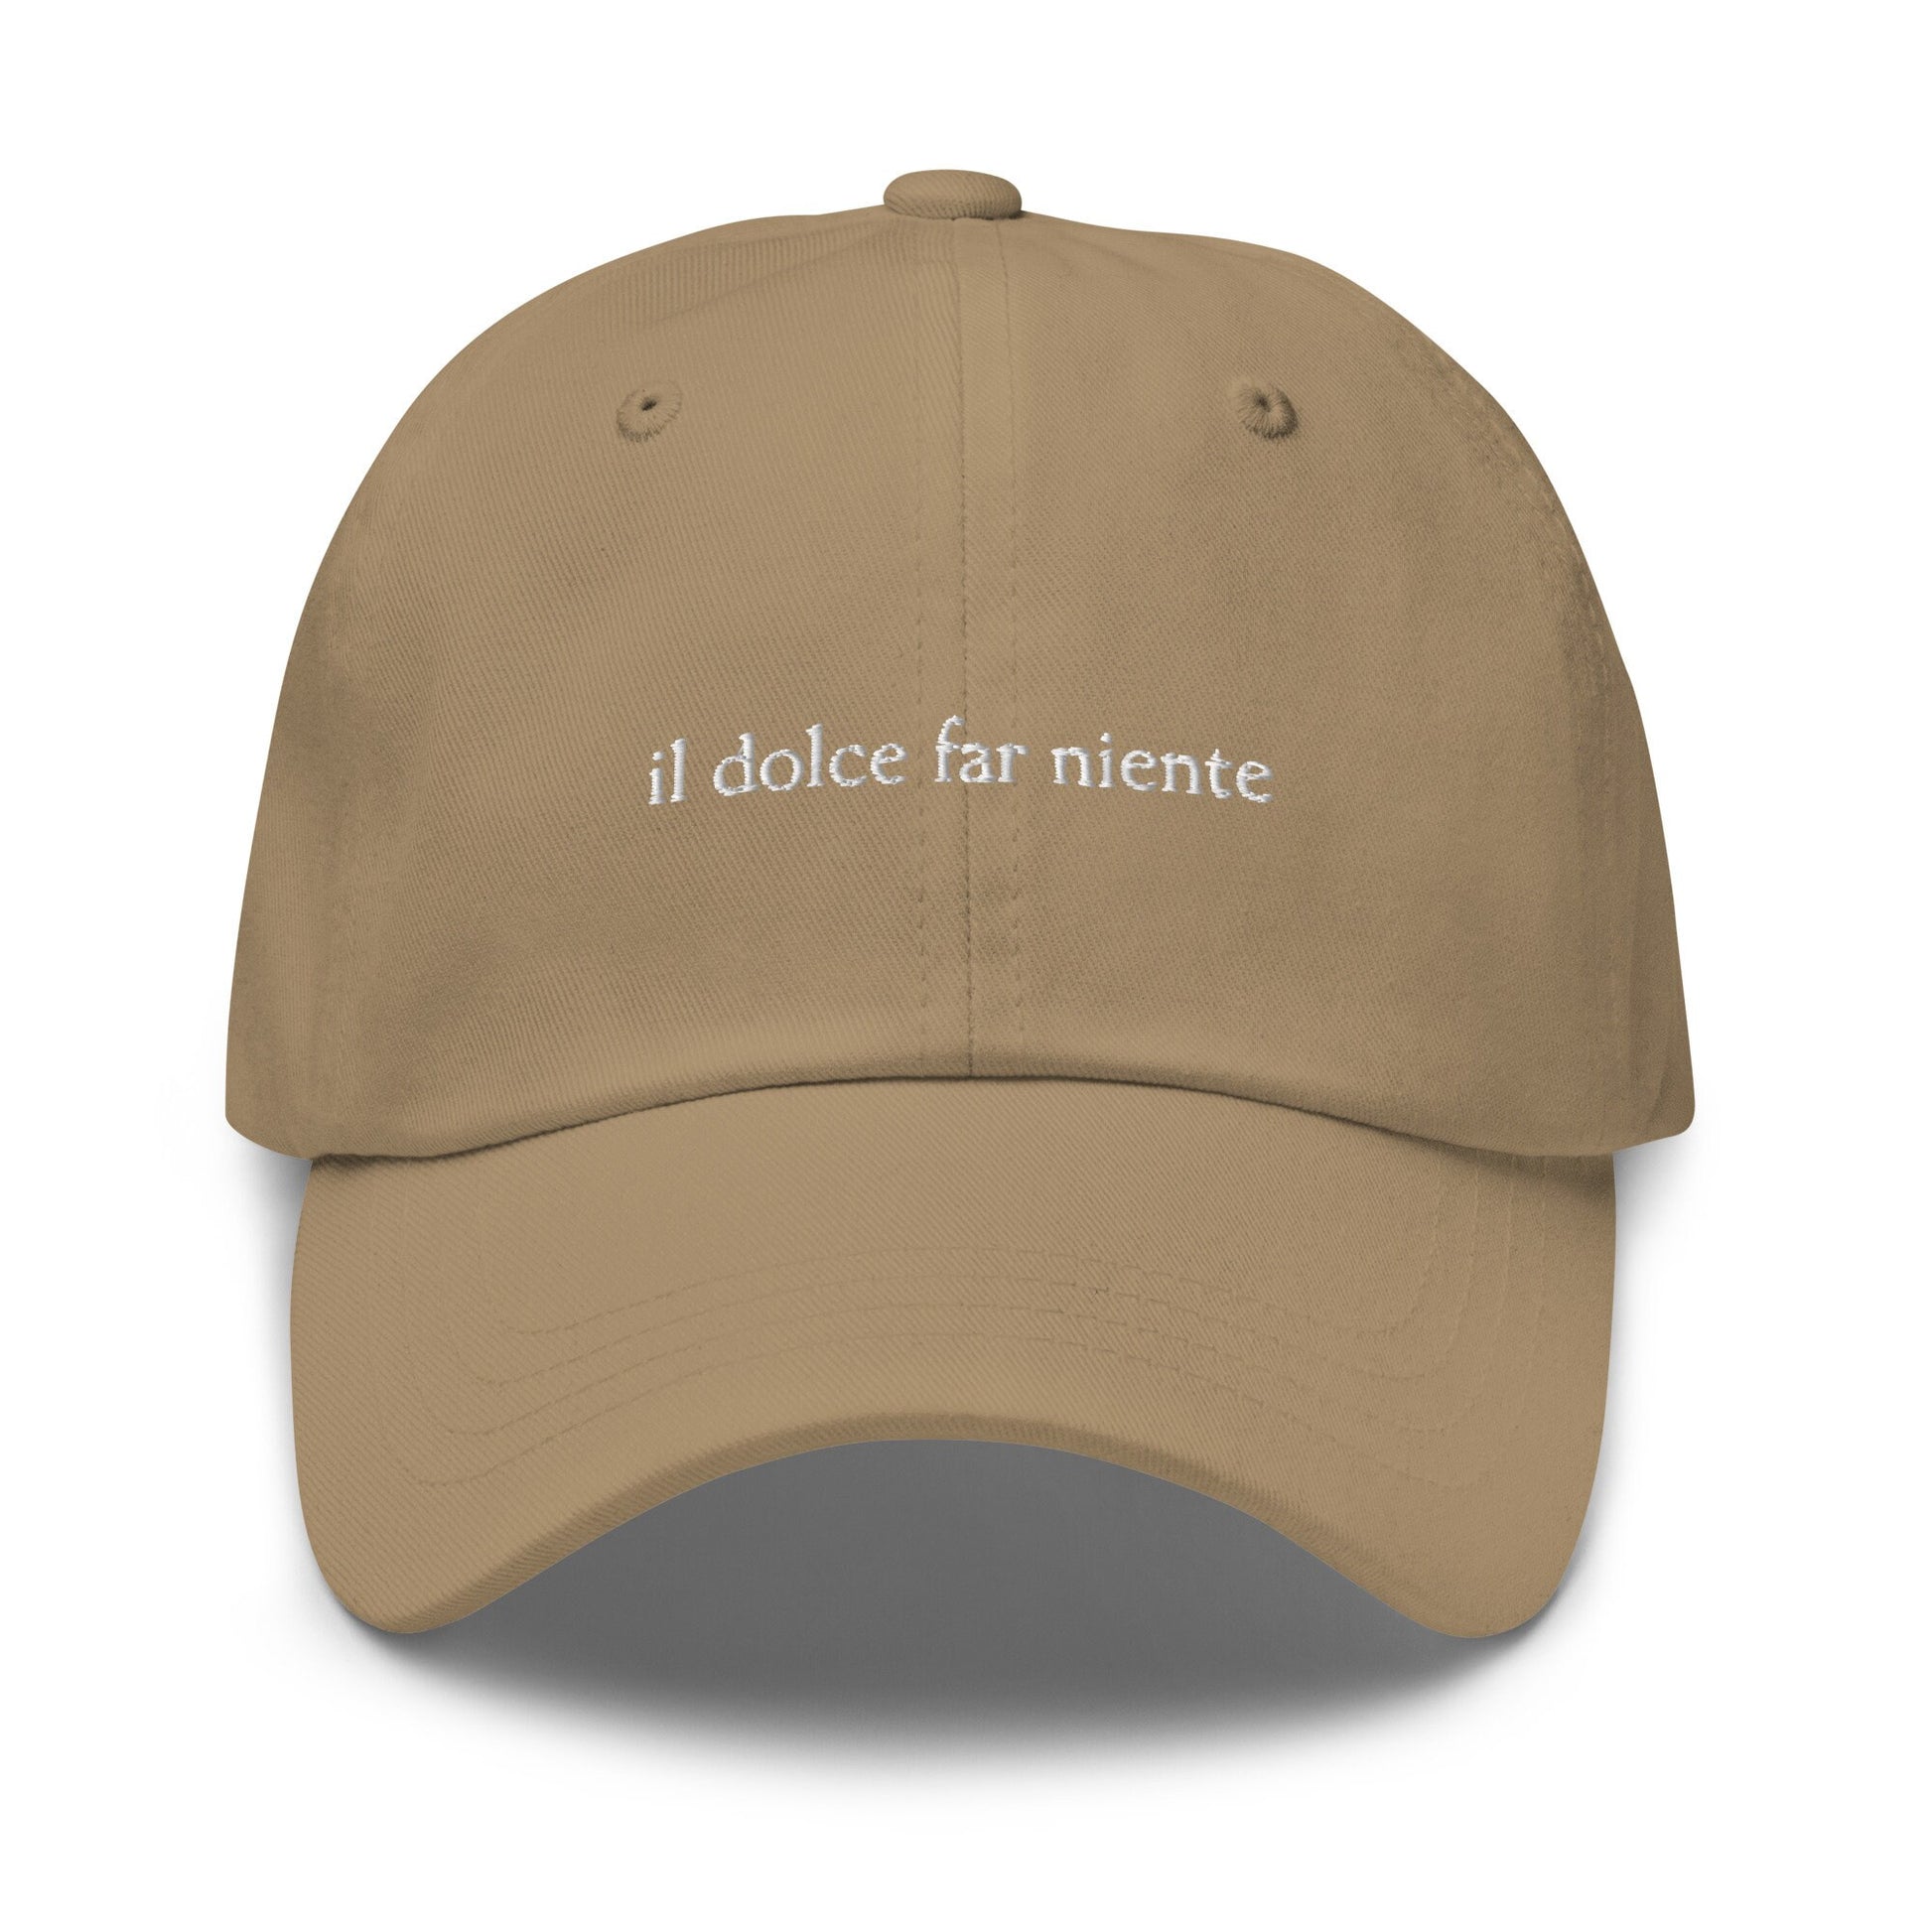 Il Dolce Far Niente Dad Hat - The Italian Art of Doing Nothing - Cotton Embroidered Cap - Multiple Colors